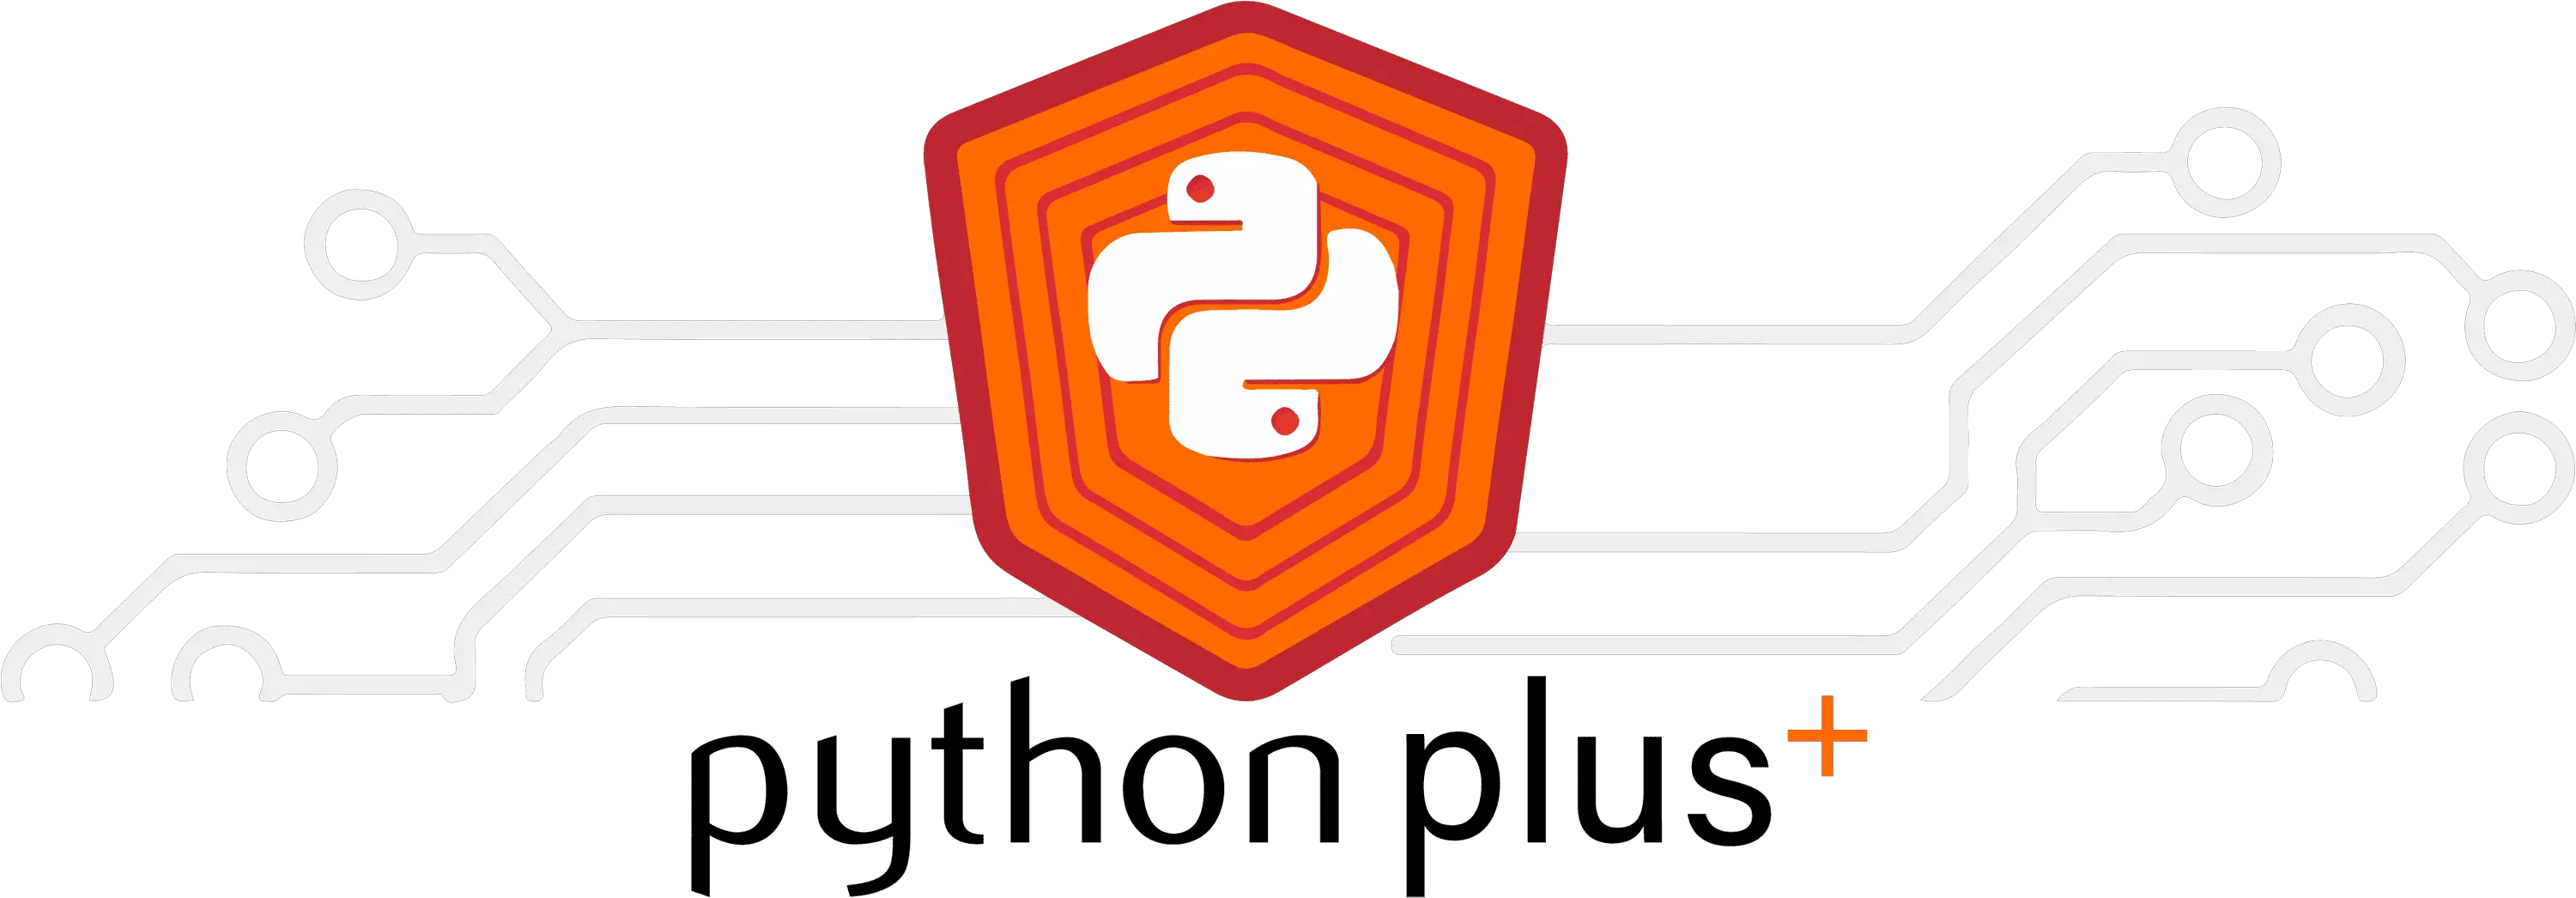 Pythonplus Python Coding Classes For Kids 9 12 4995 Trial Png Python Logo Png